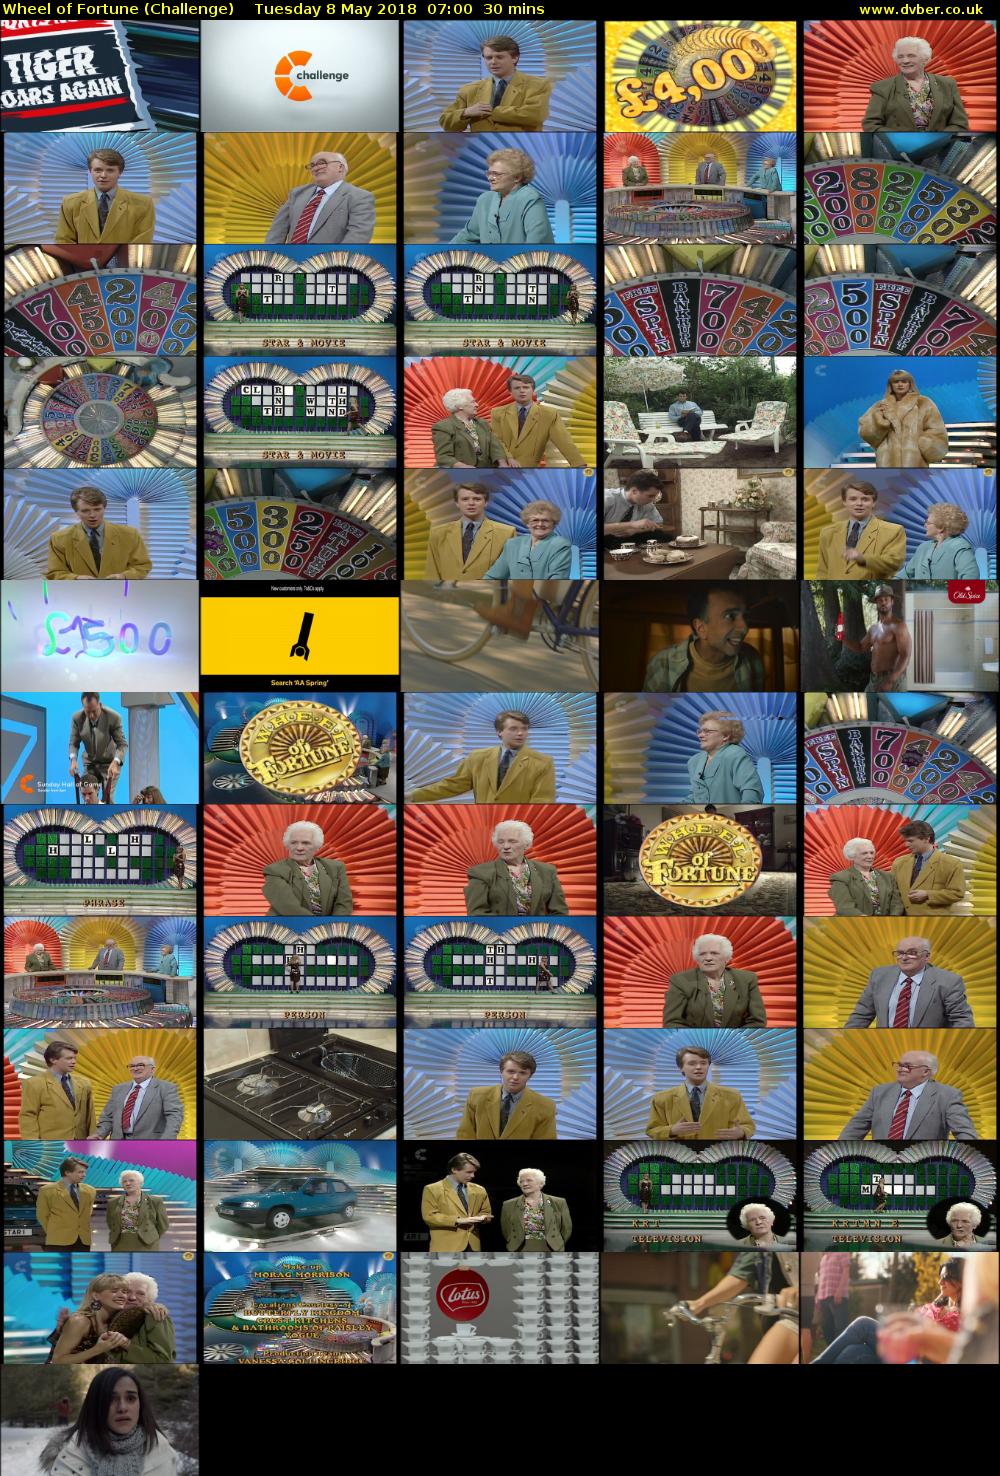 Wheel of Fortune (Challenge) Tuesday 8 May 2018 07:00 - 07:30